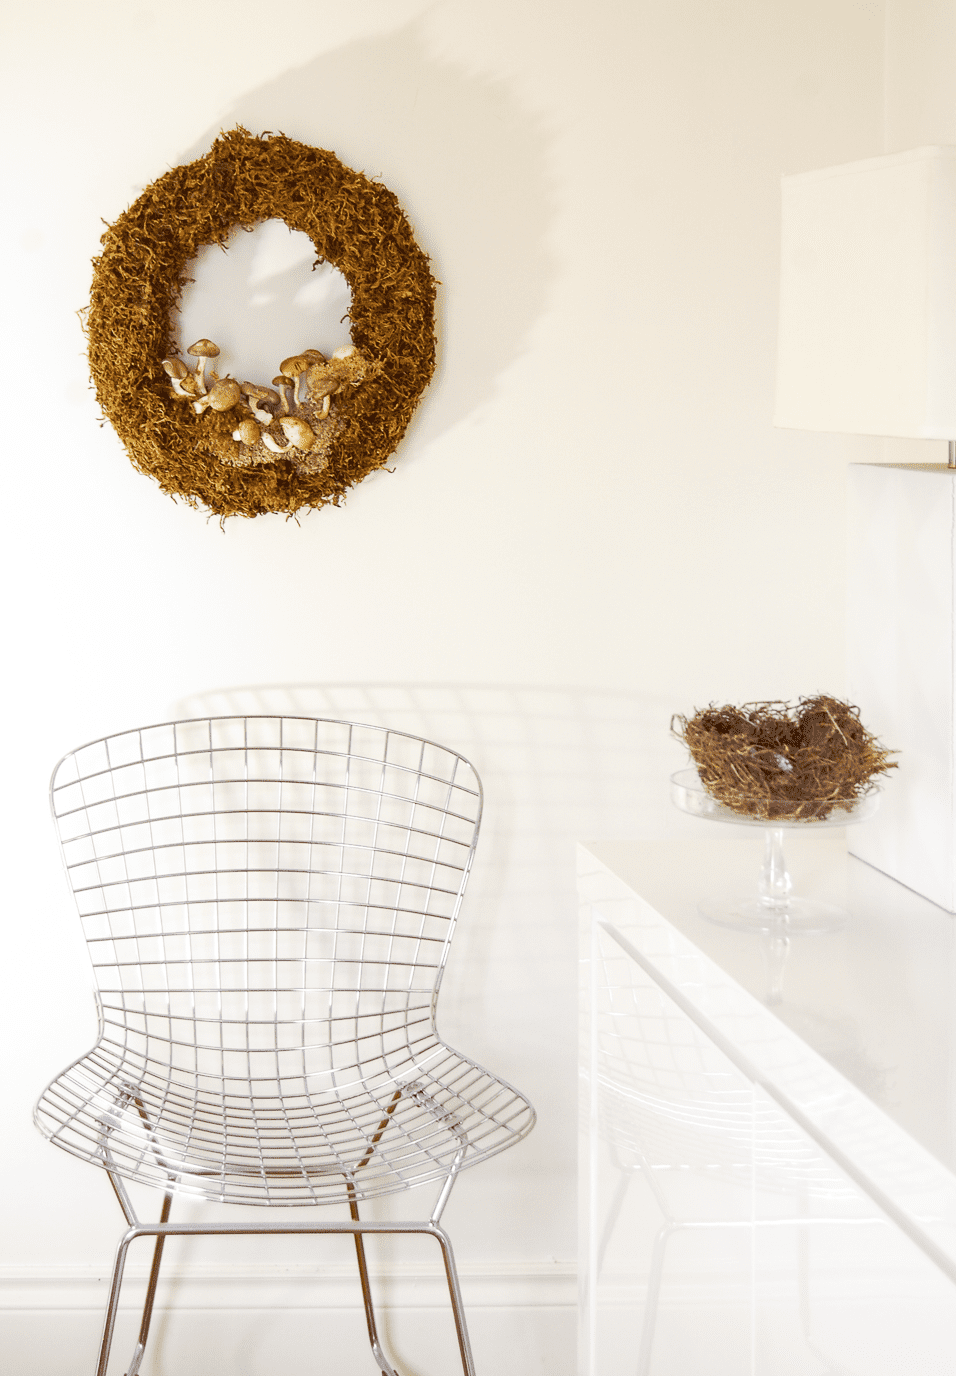 Moss wreath with mushrooms hangs on white wall over Bertoia chair.